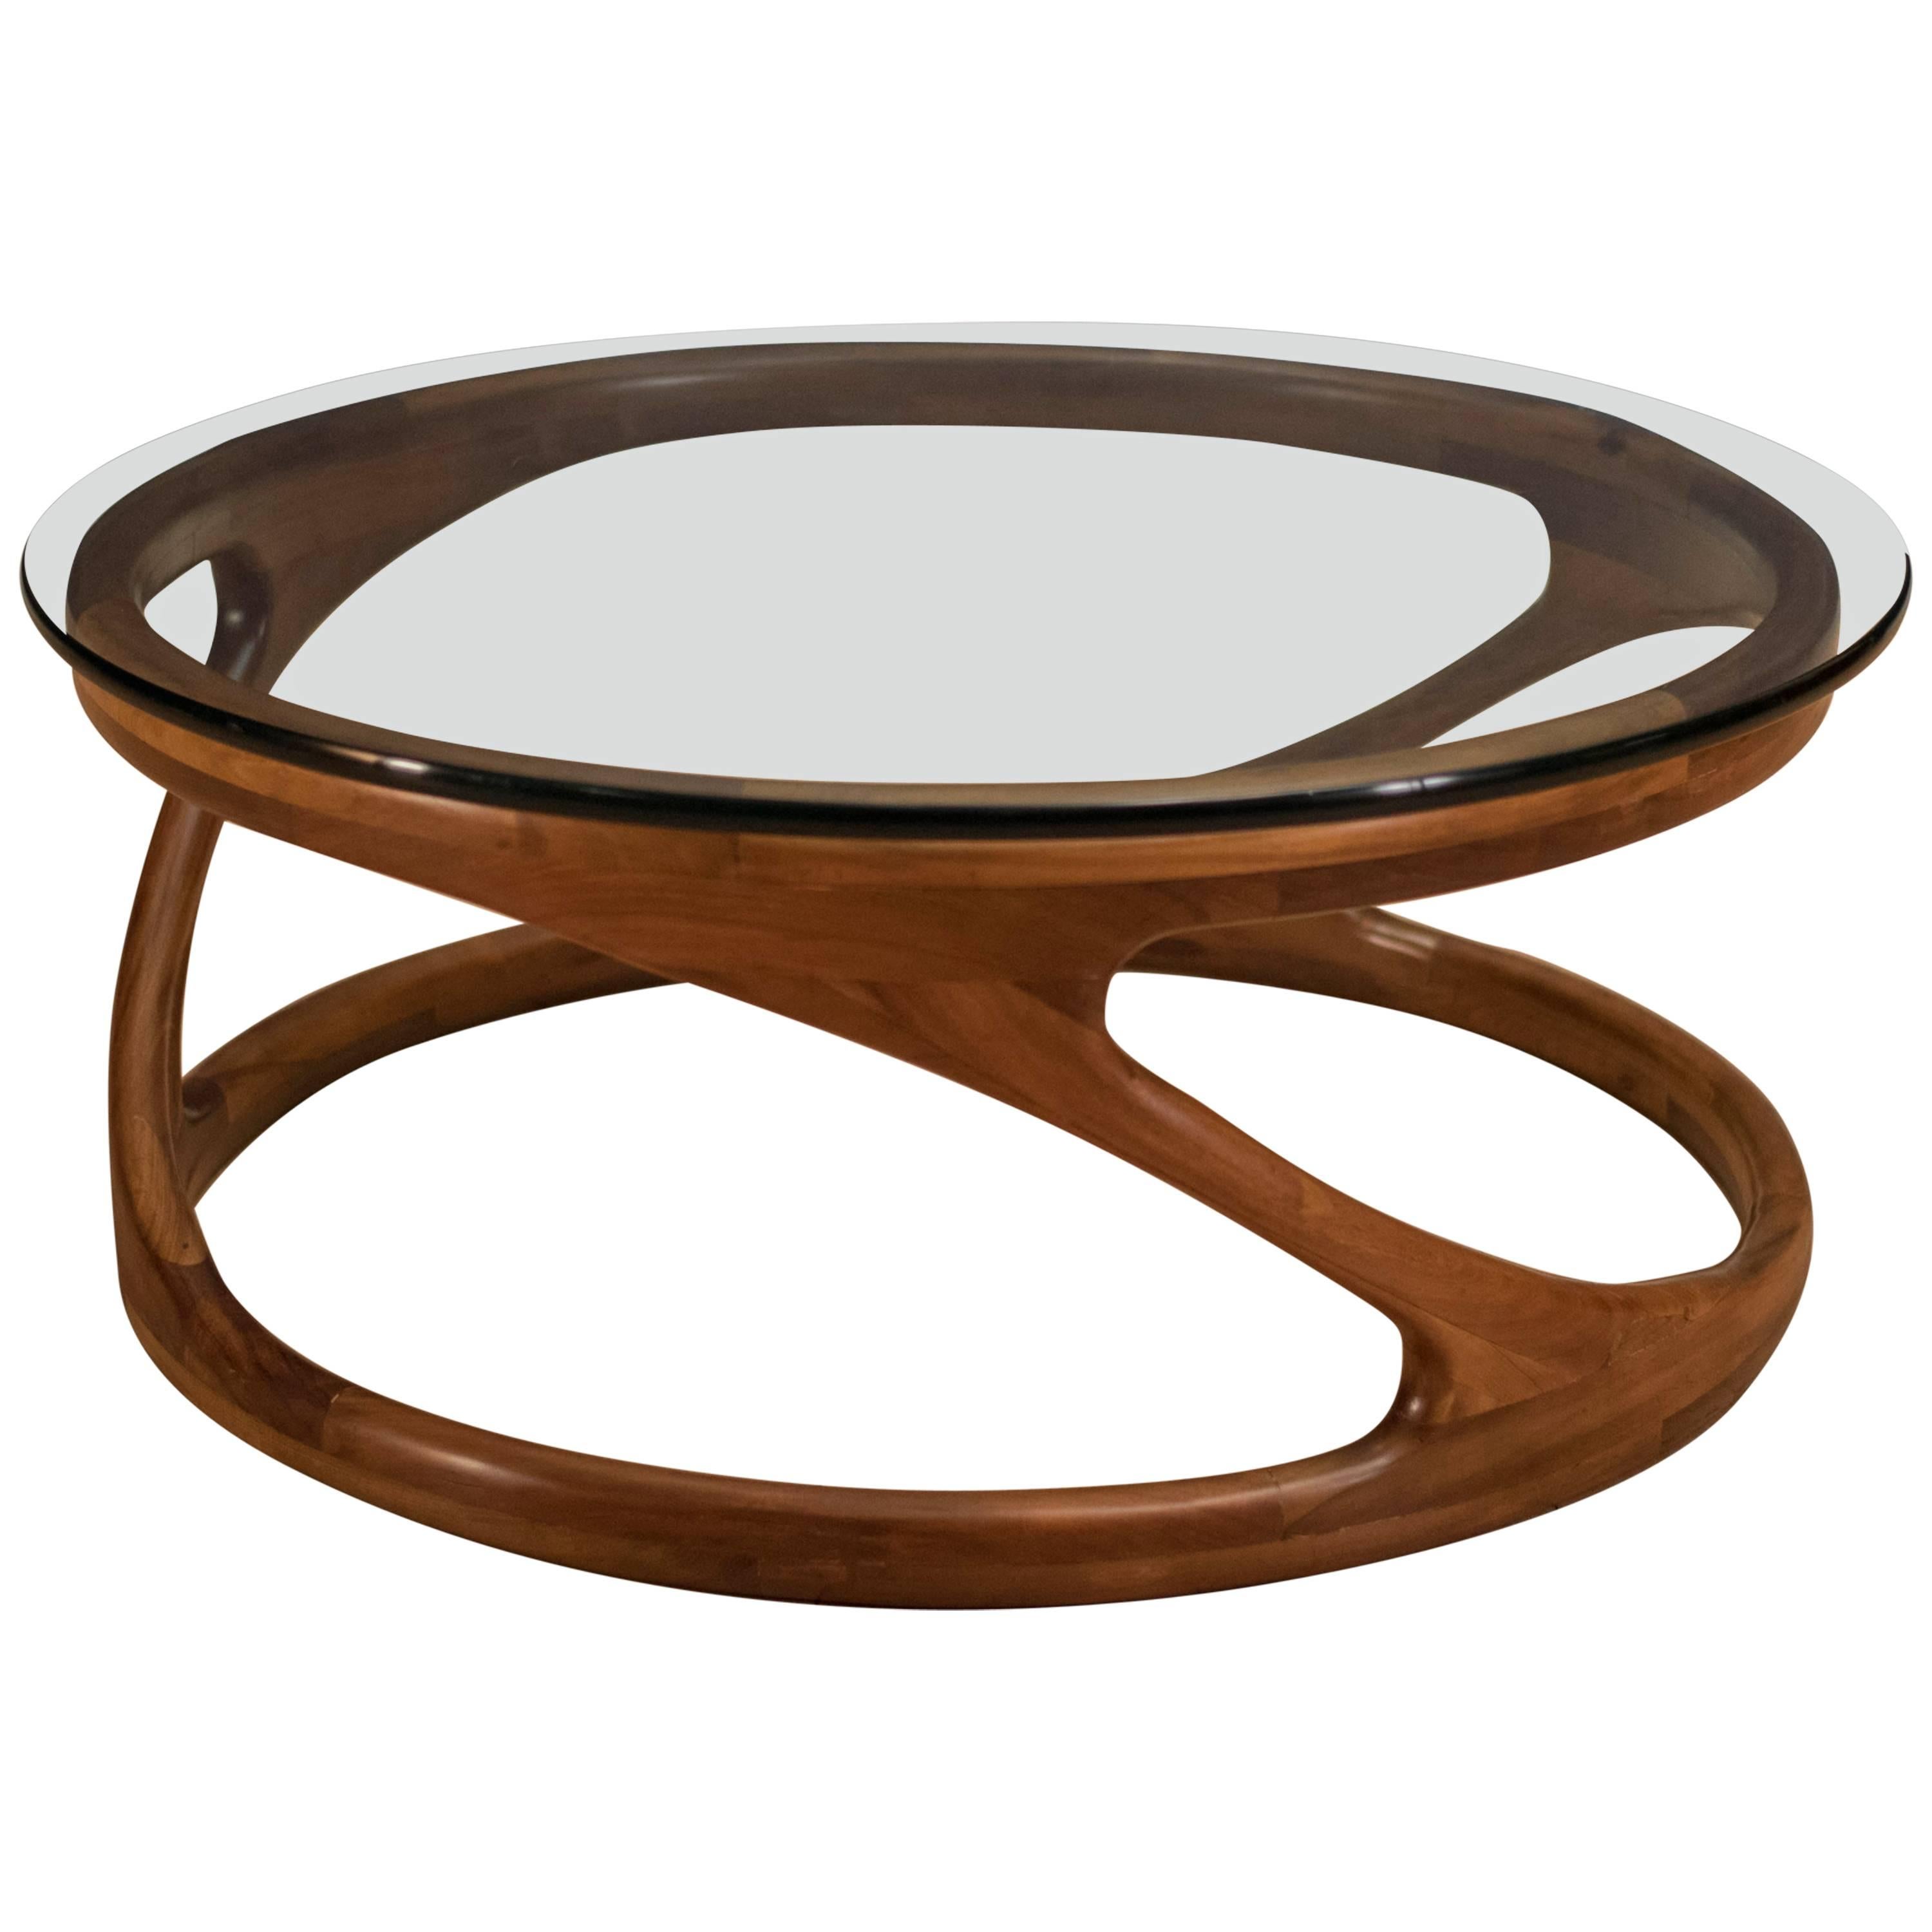 American Studio Craft Sculptural Walnut and Glass Coffee Table